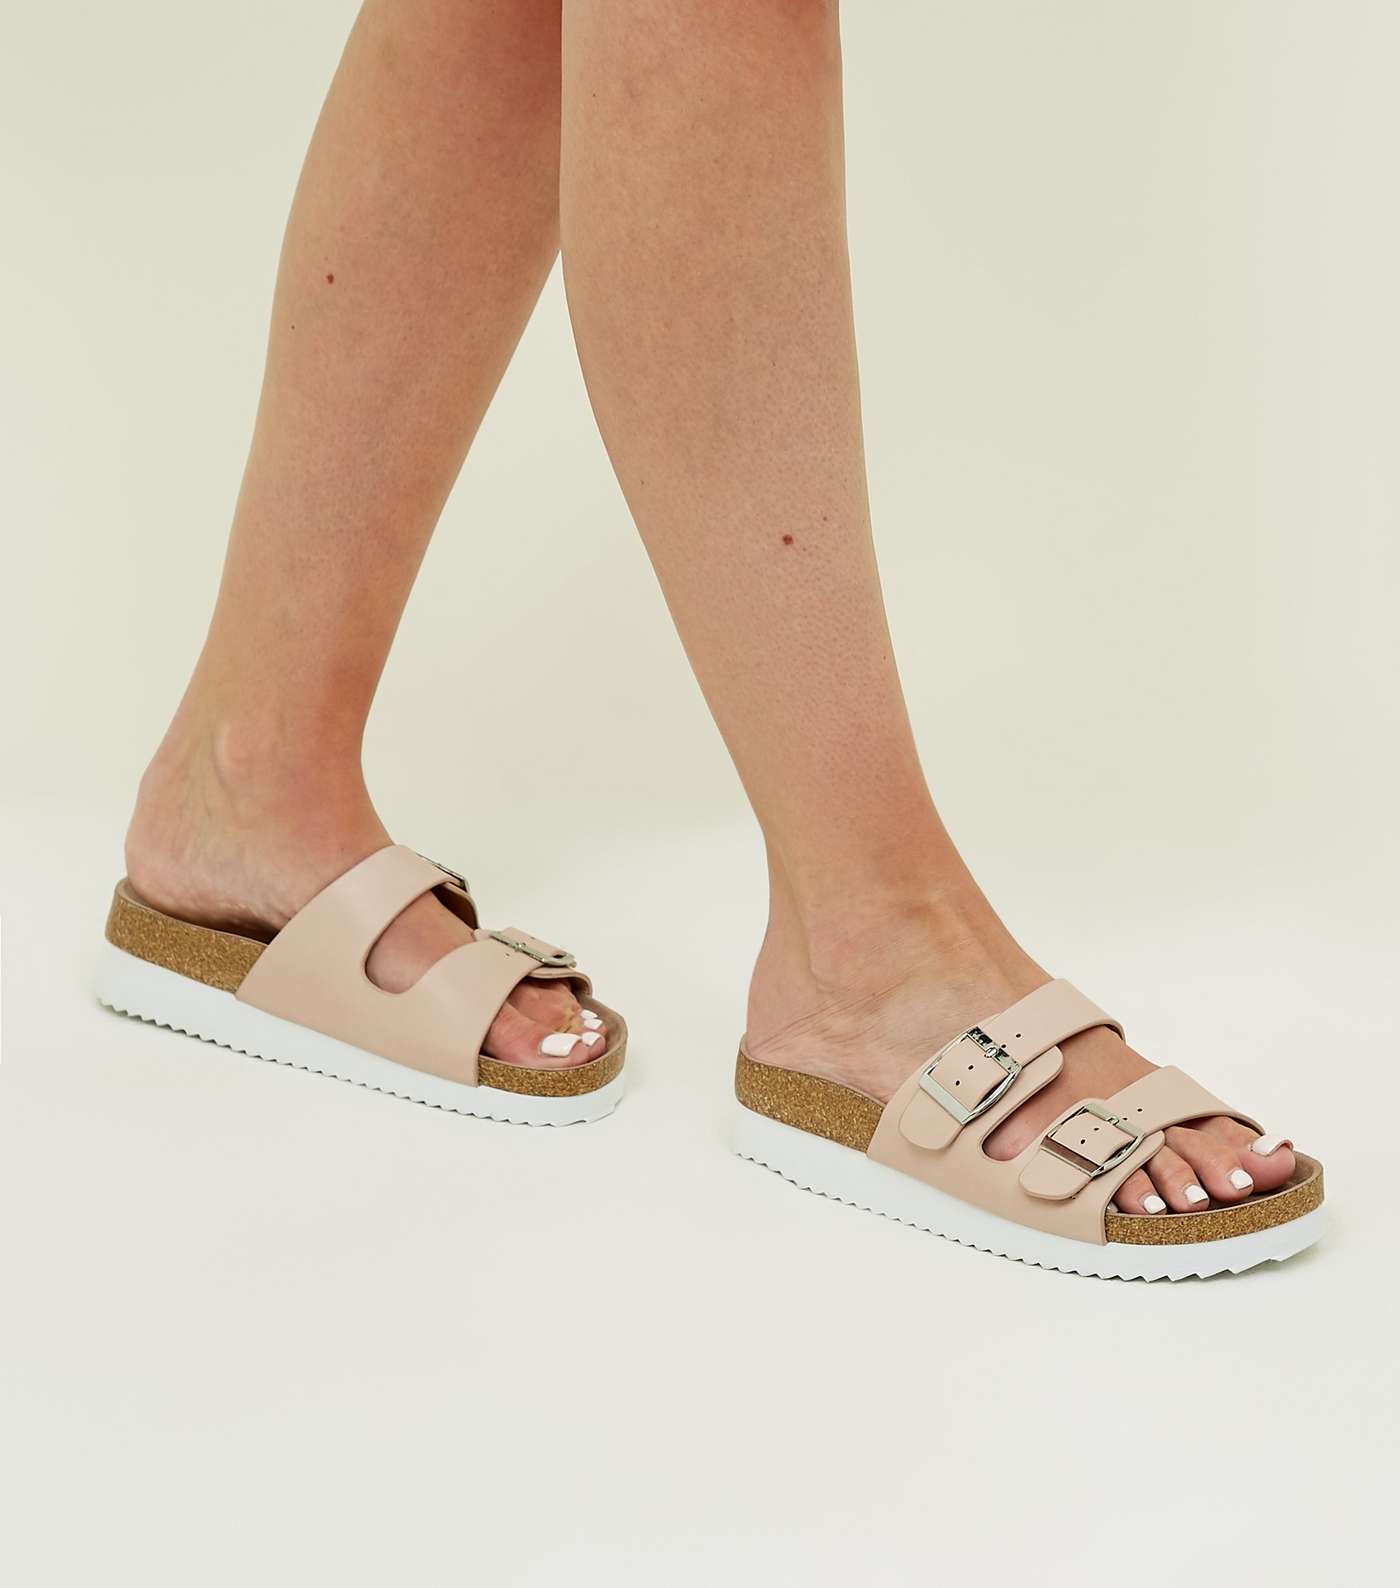 Wide Fit Nude Leather-Look Footbed Sliders Image 2